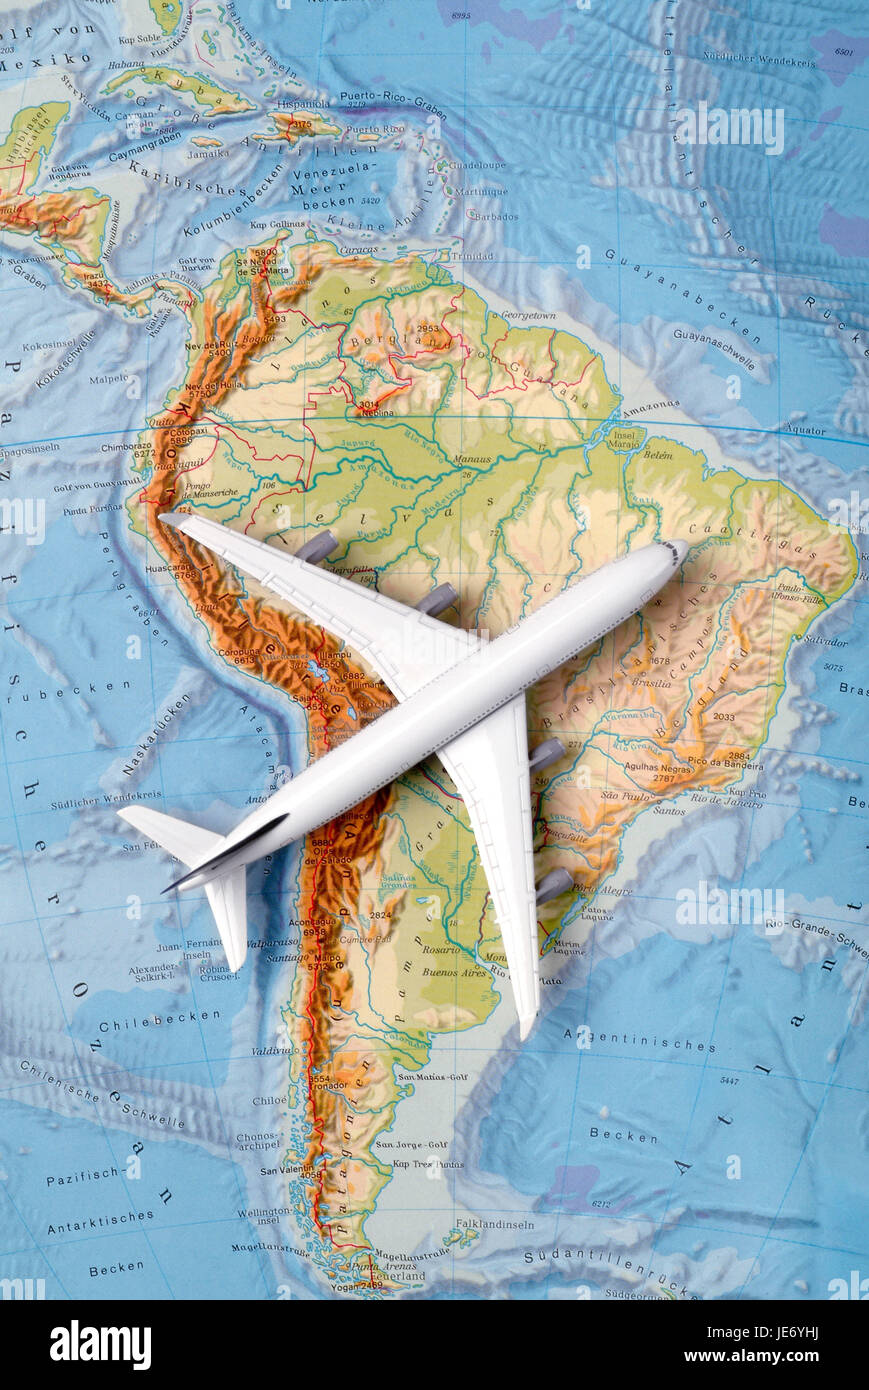 Airplane on a map of South America, Stock Photo